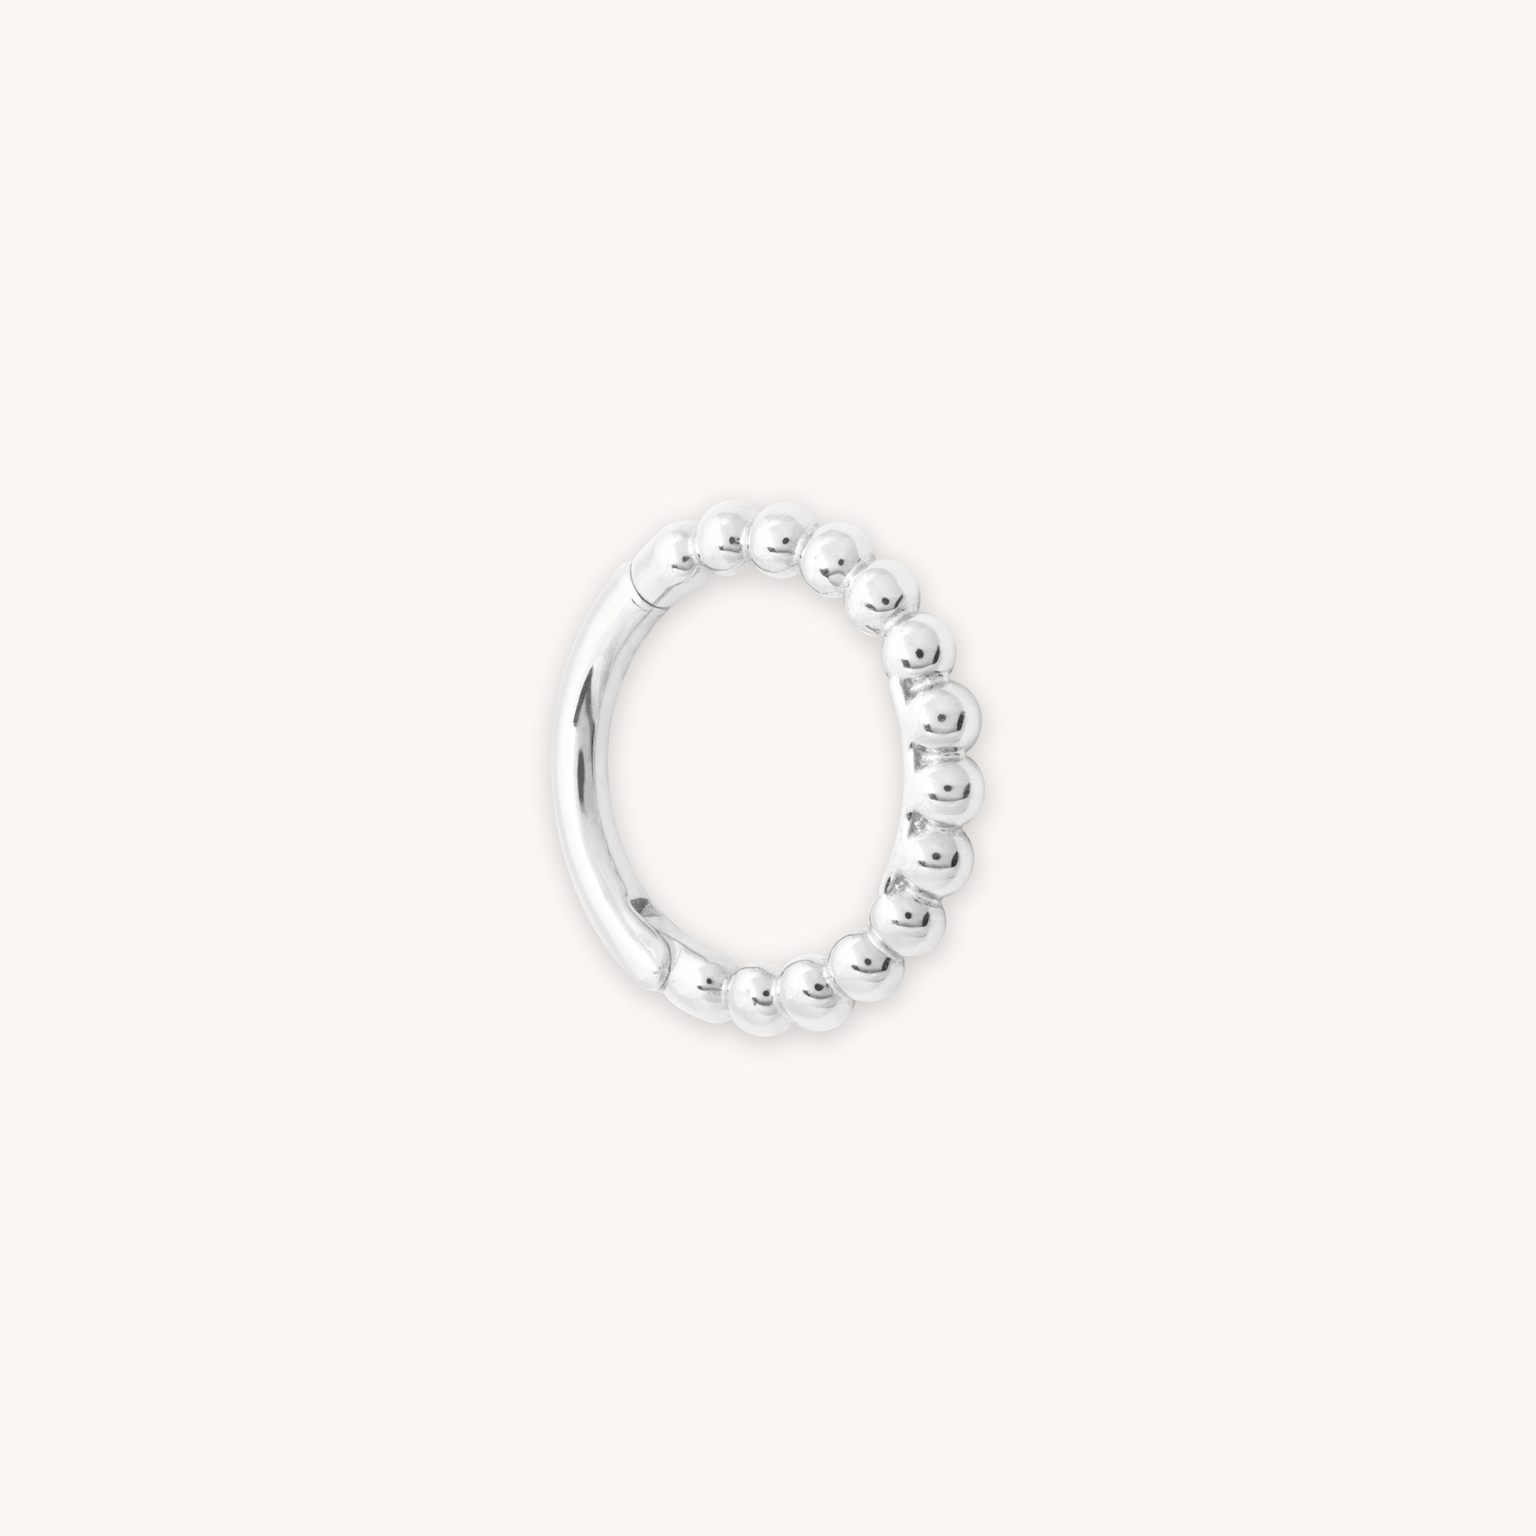 Solid White Gold Beaded Piercing Hoop Cut Out